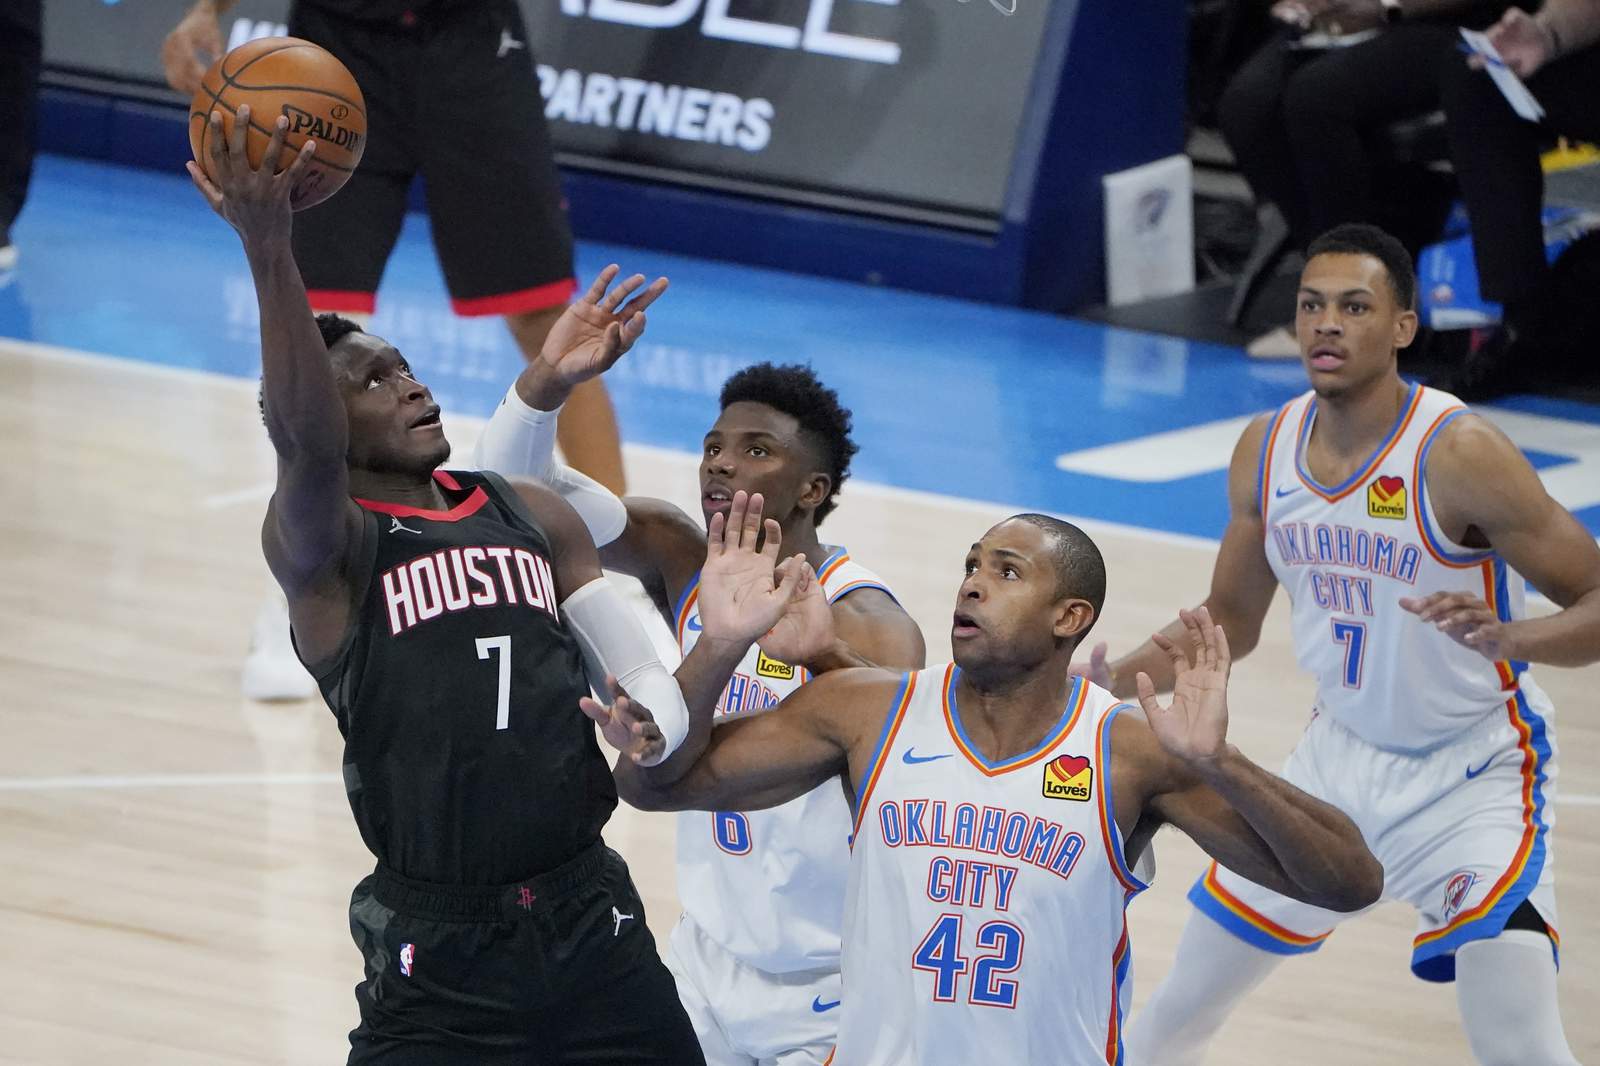 Williams scores 19; Thunder win rematch with Rockets 104-87